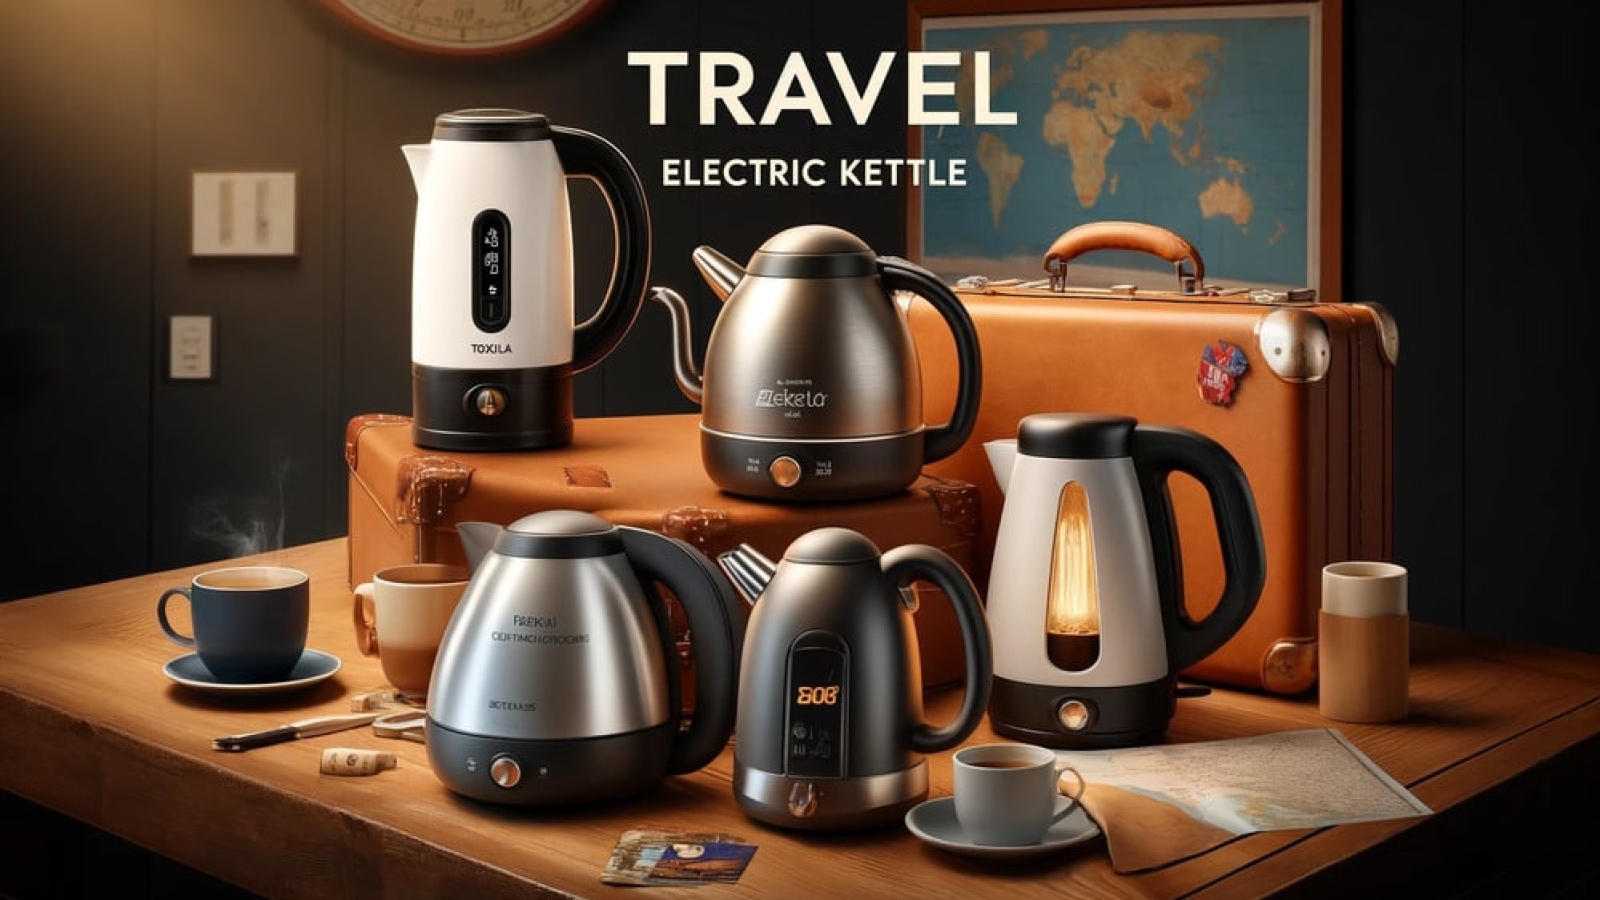 Best Travel Electric Kettle